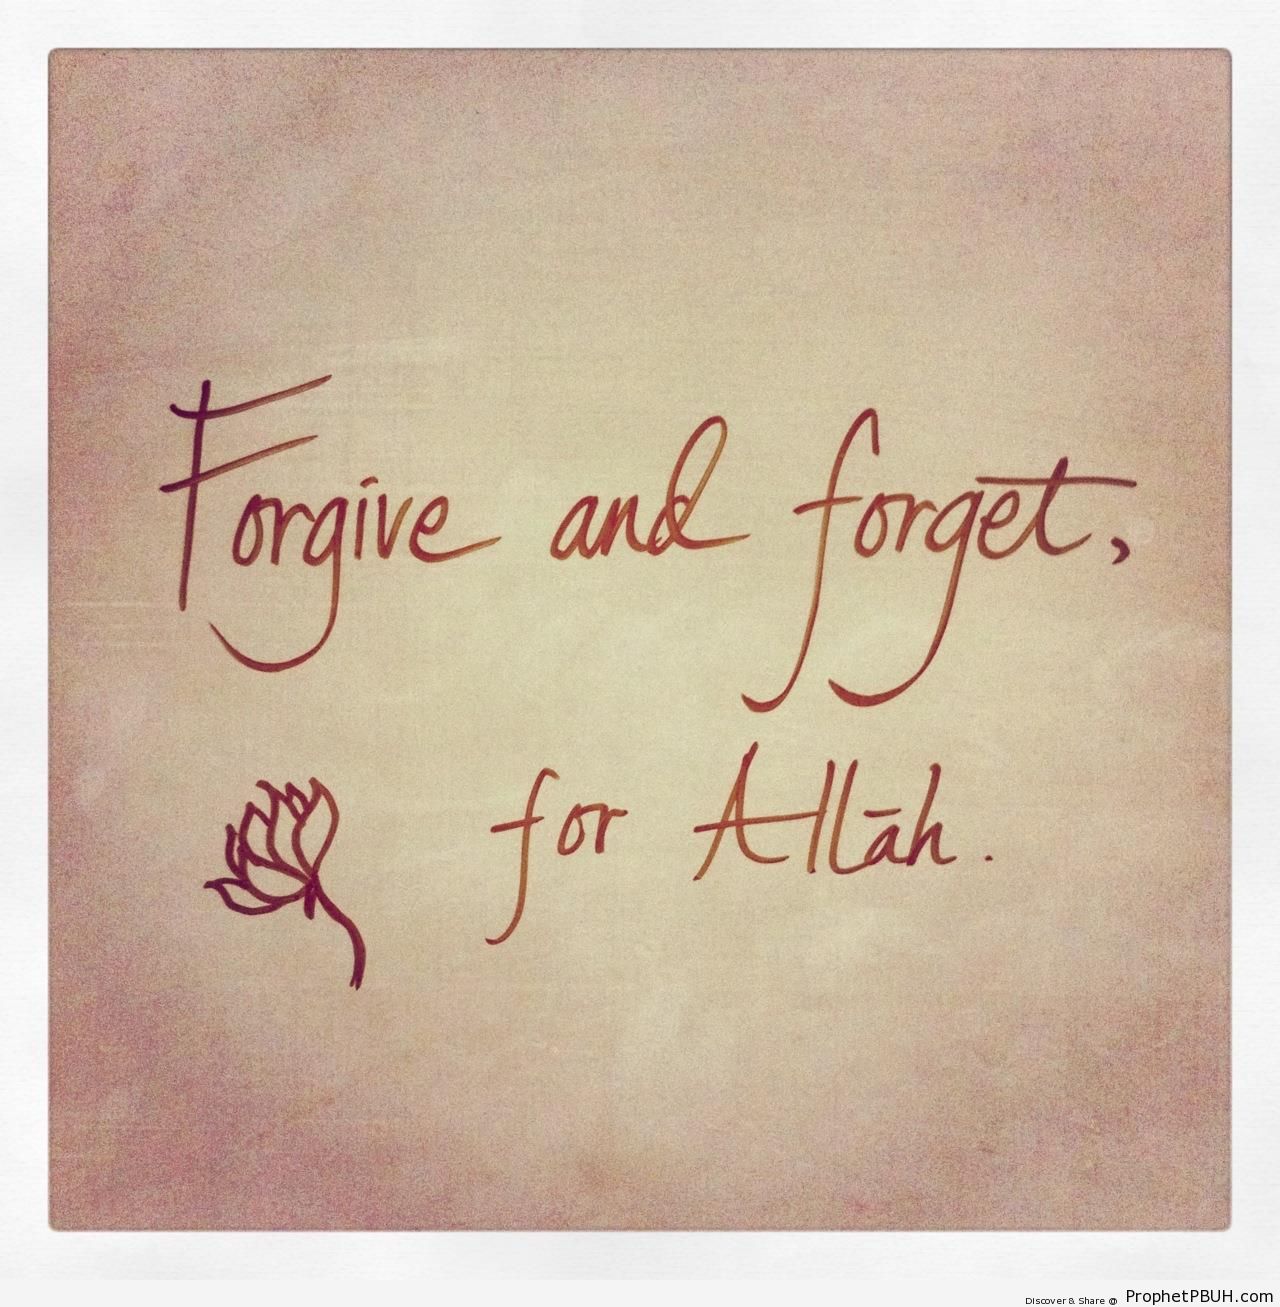 For Allah - Islamic Quotes About Forgiving People's Wrongs 